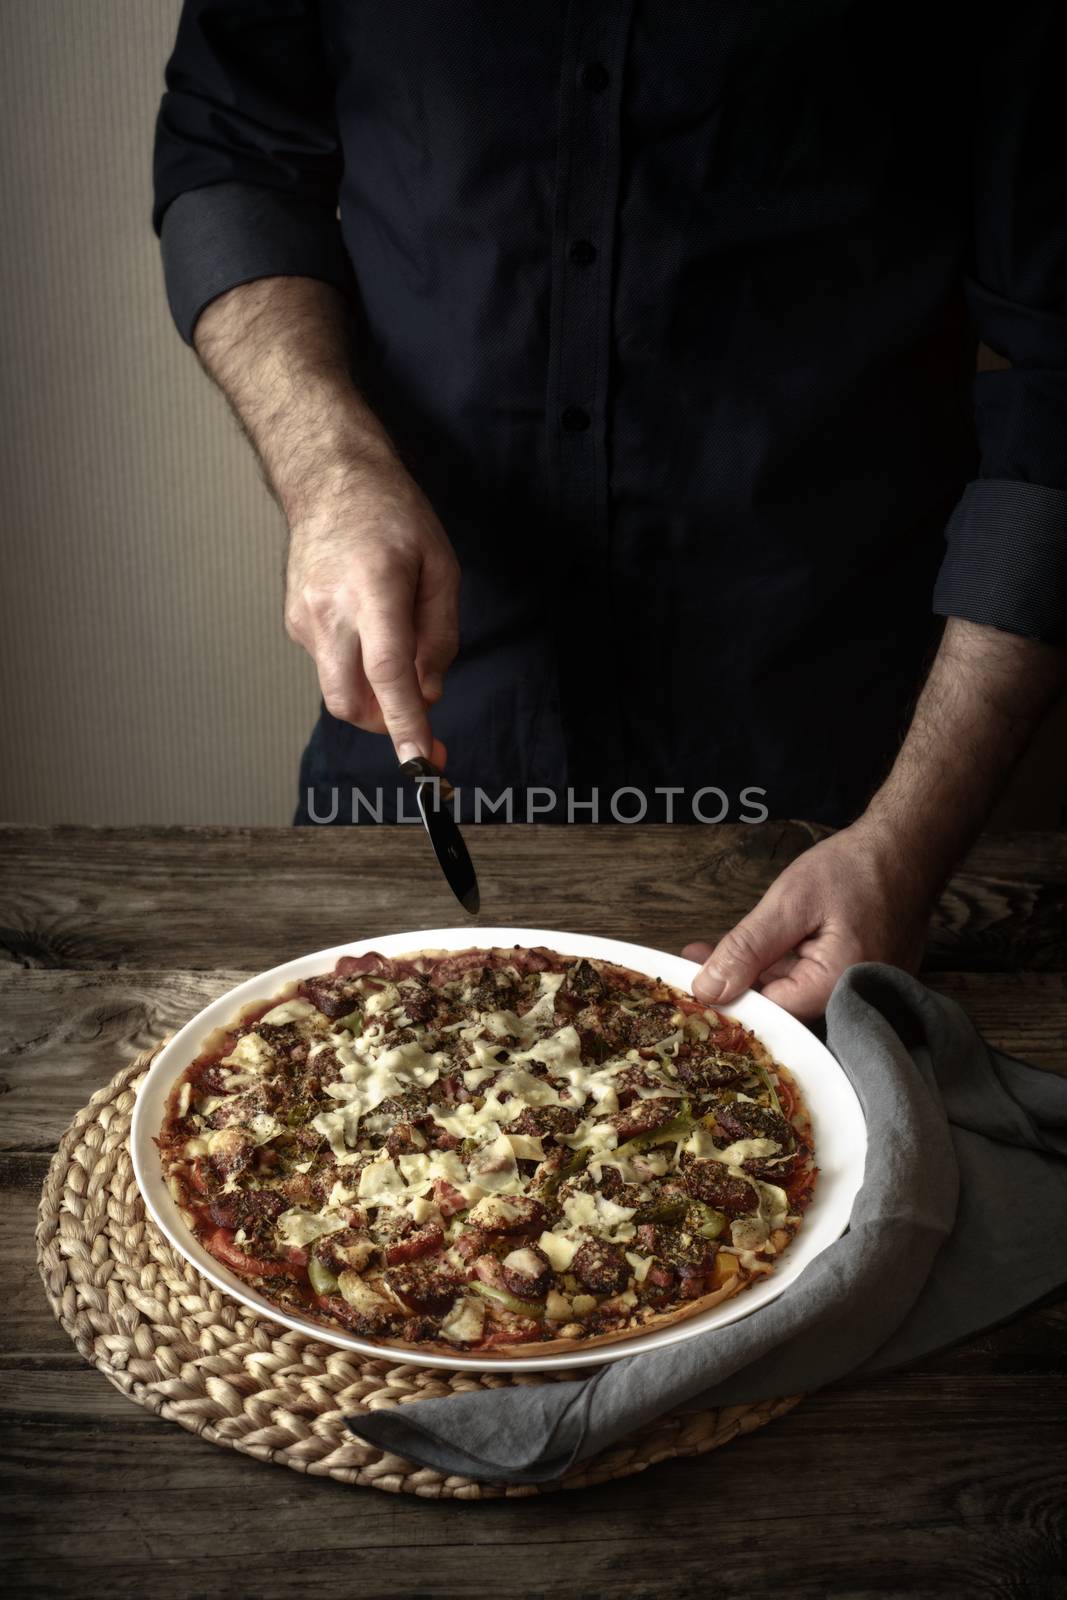 Man cuts the finished pizza on a white dish vertical